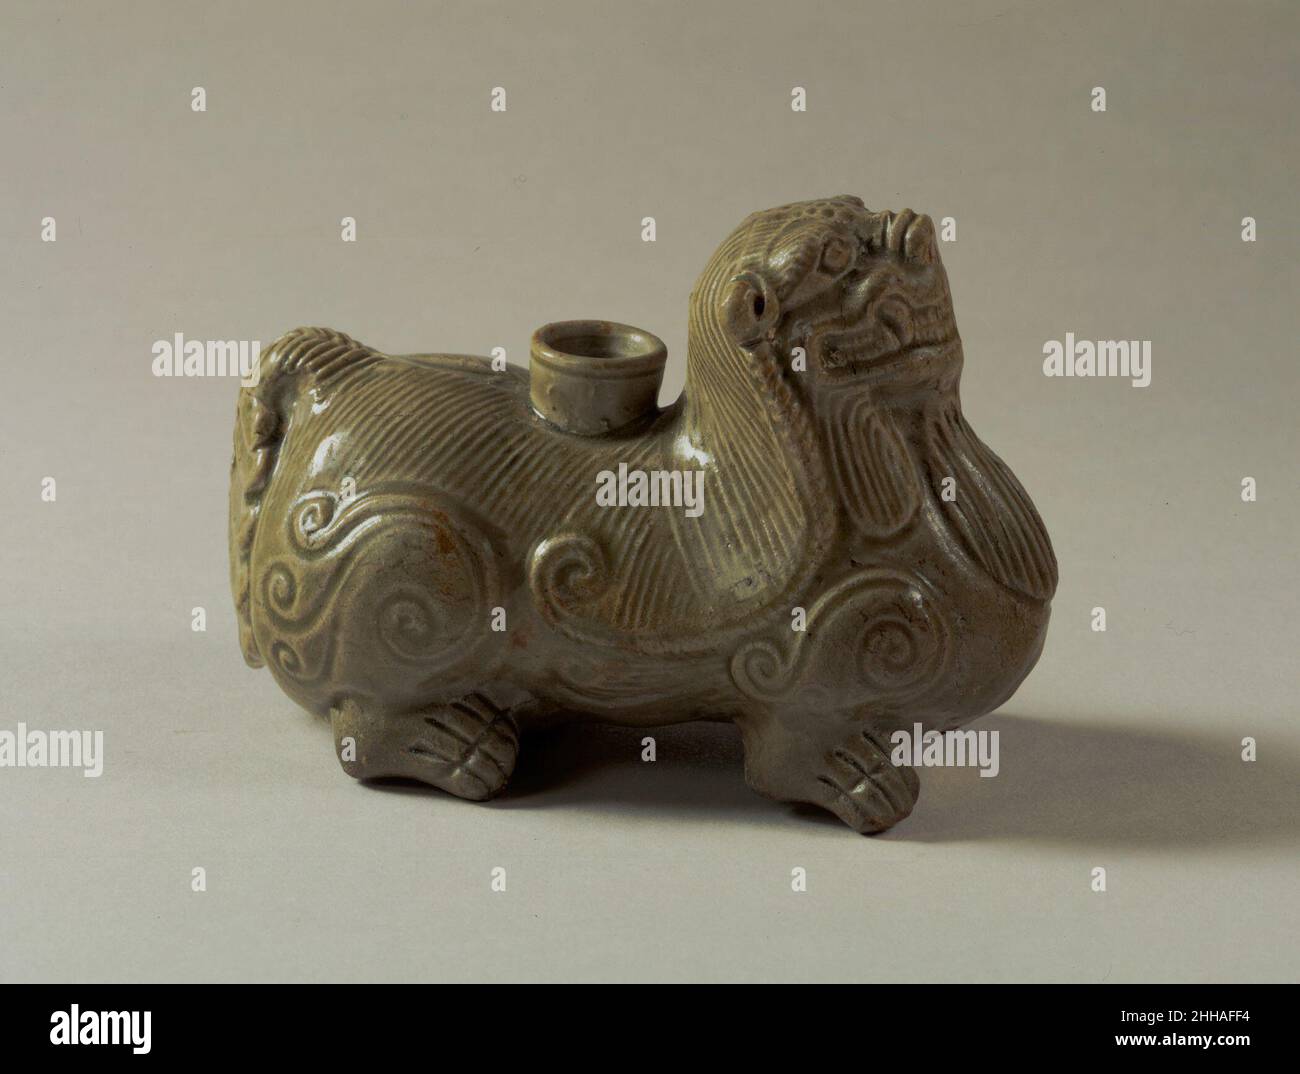 Candle Stand in the Shape of a Fantastic Animal China. Candle Stand in the Shape of a Fantastic Animal  42335 Stock Photo